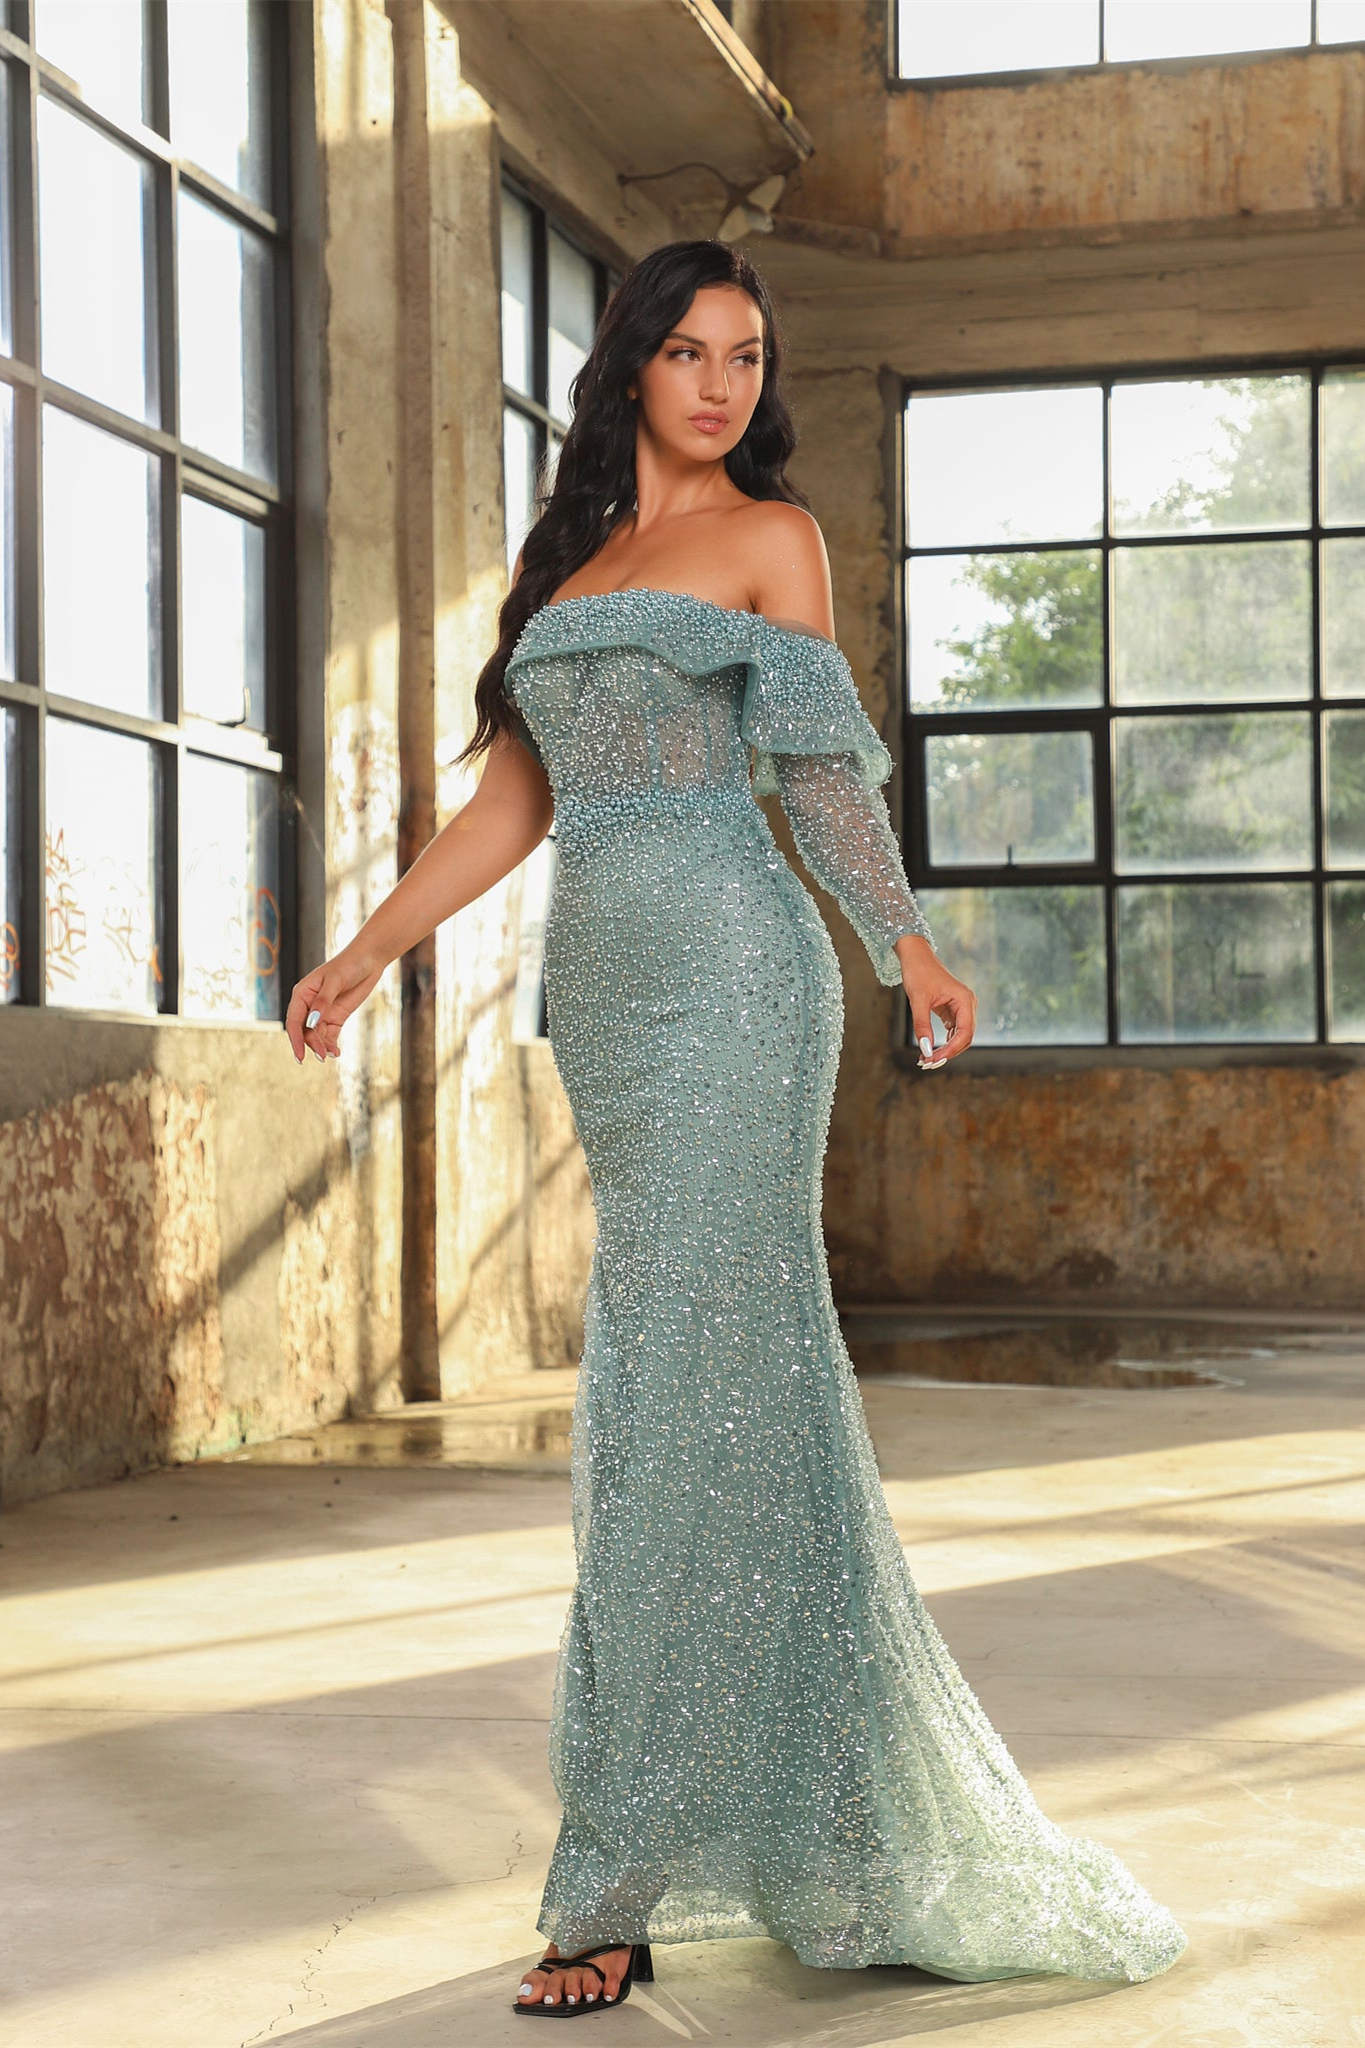 Classic Long Sleeves Off-the-Shoulder Evening Dress Mermaid Sequins With Pearls - lulusllly